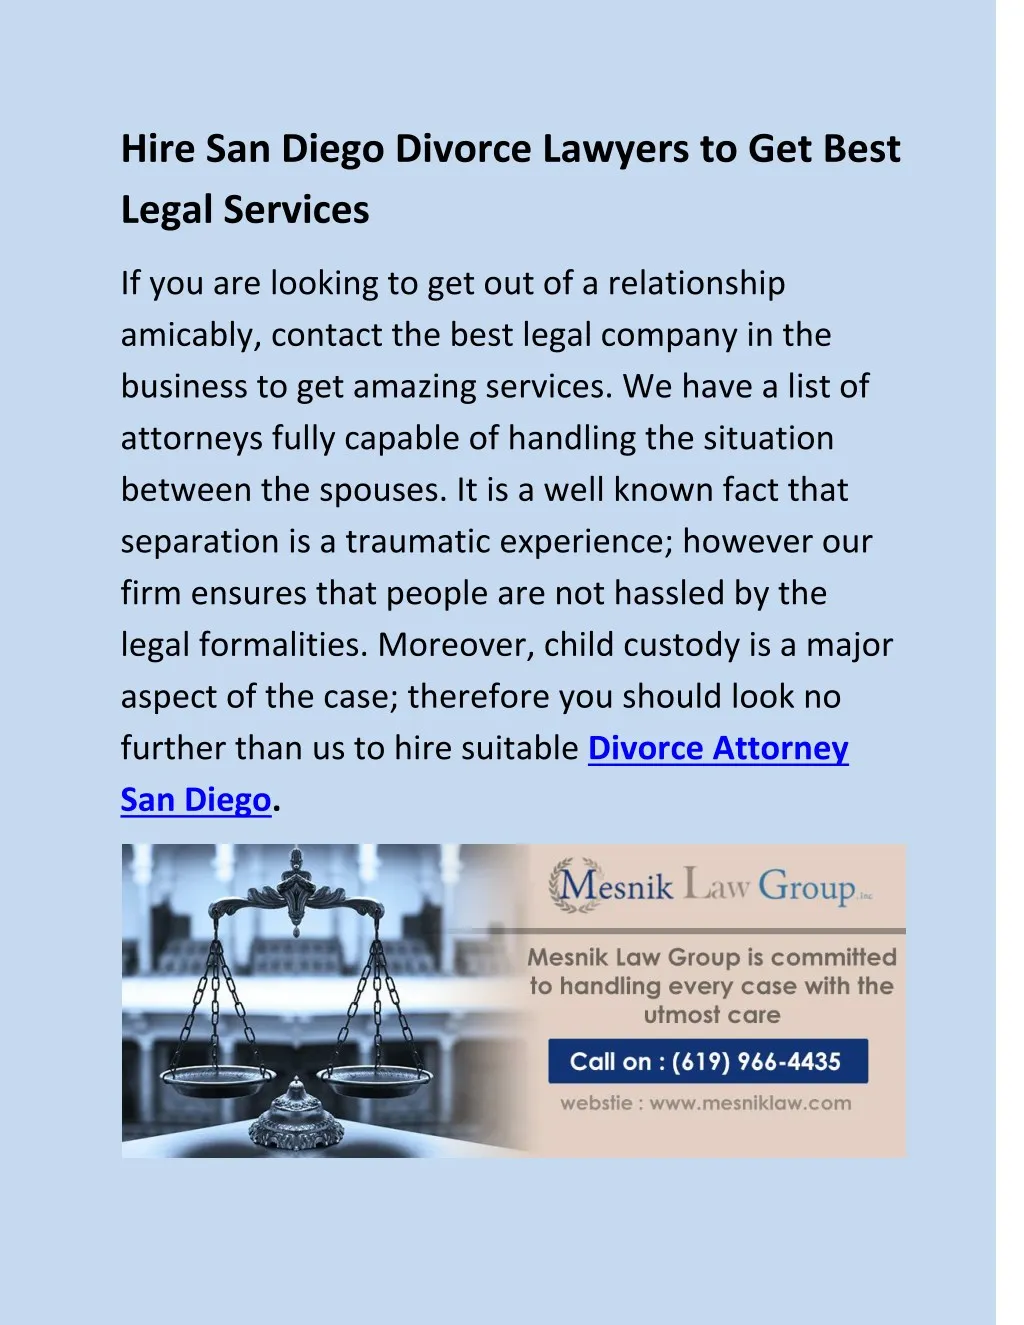 hire san diego divorce lawyers to get best legal